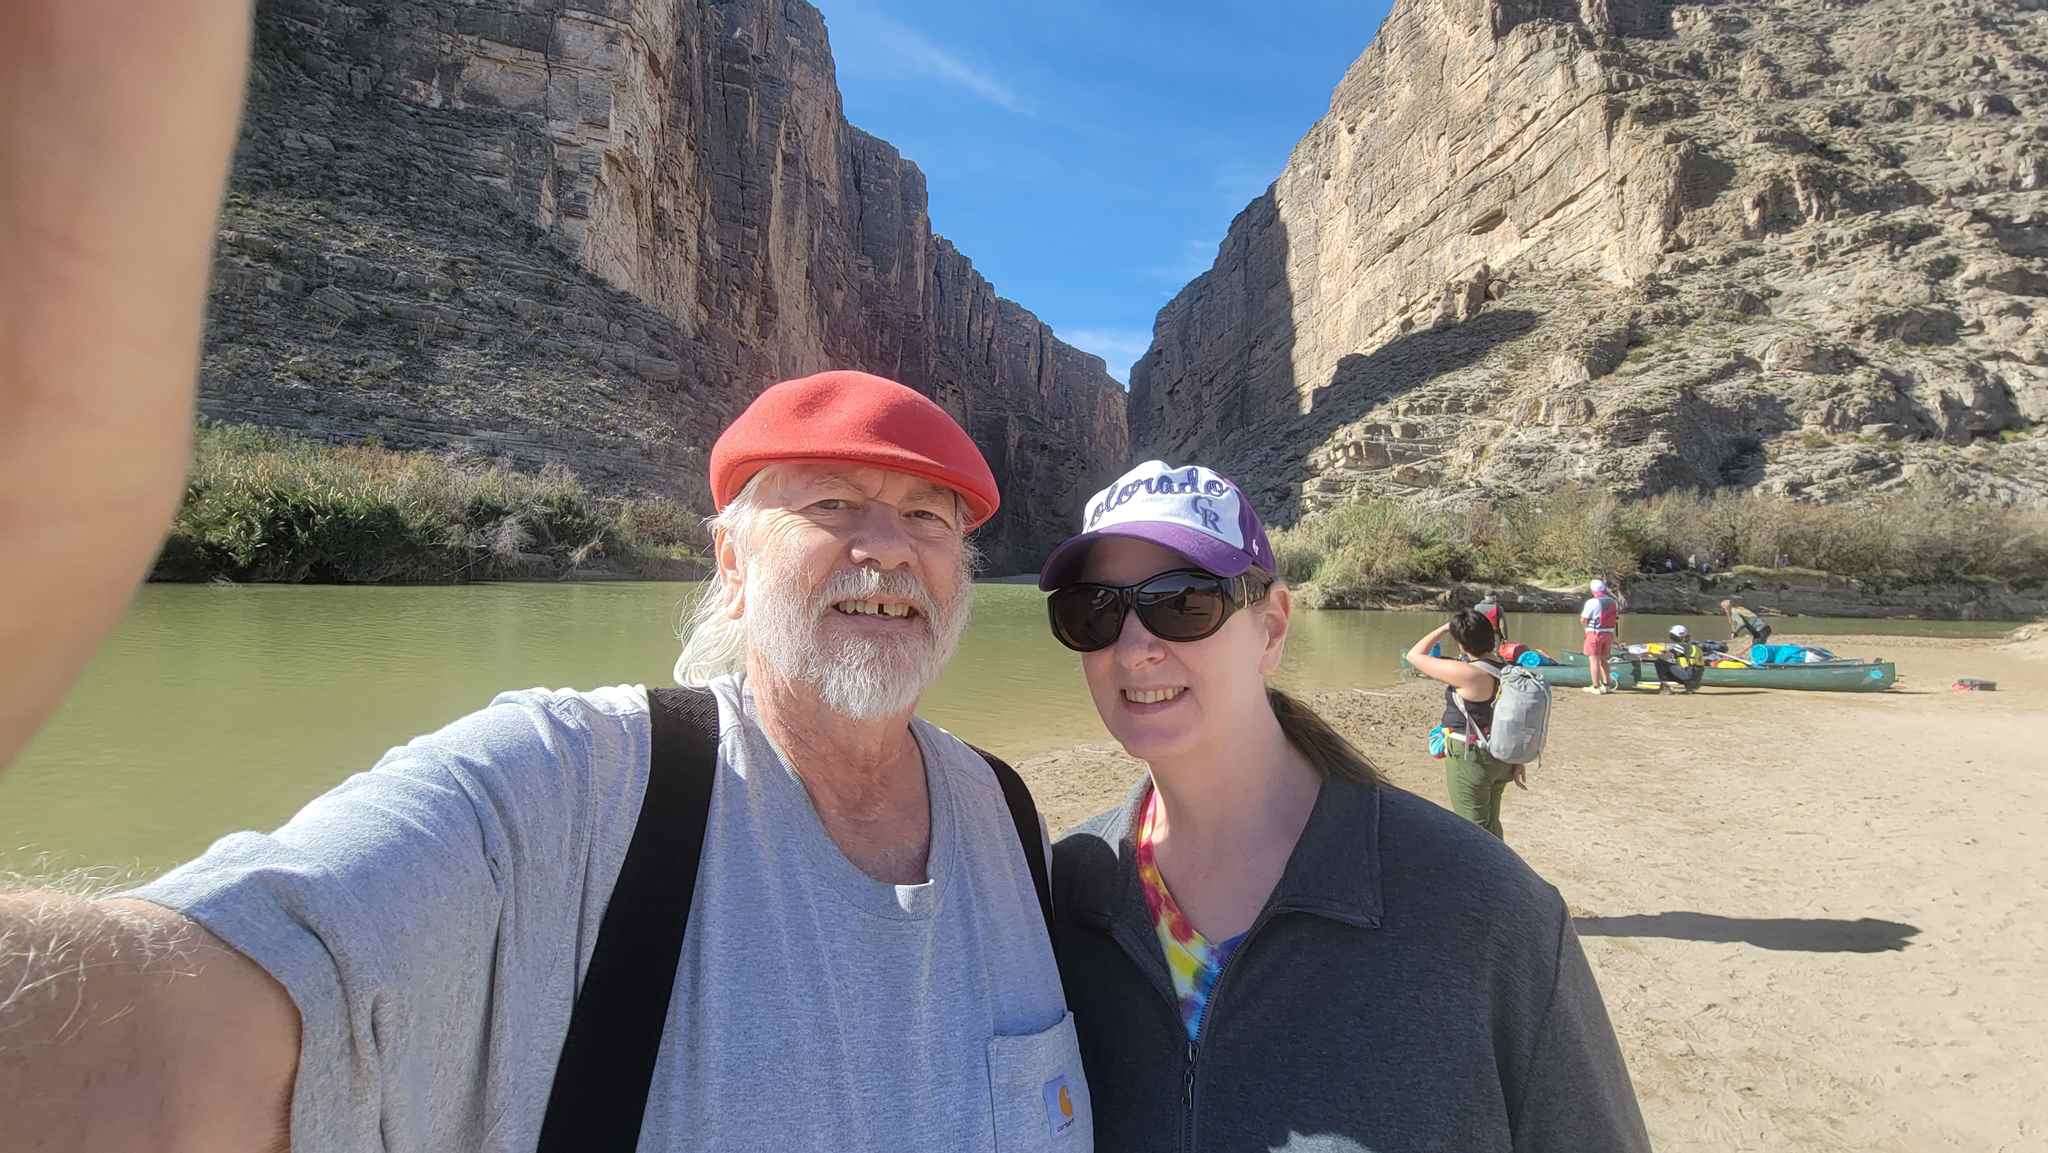 Diana and Noel along the Rio Grande River - canoeing it look great!